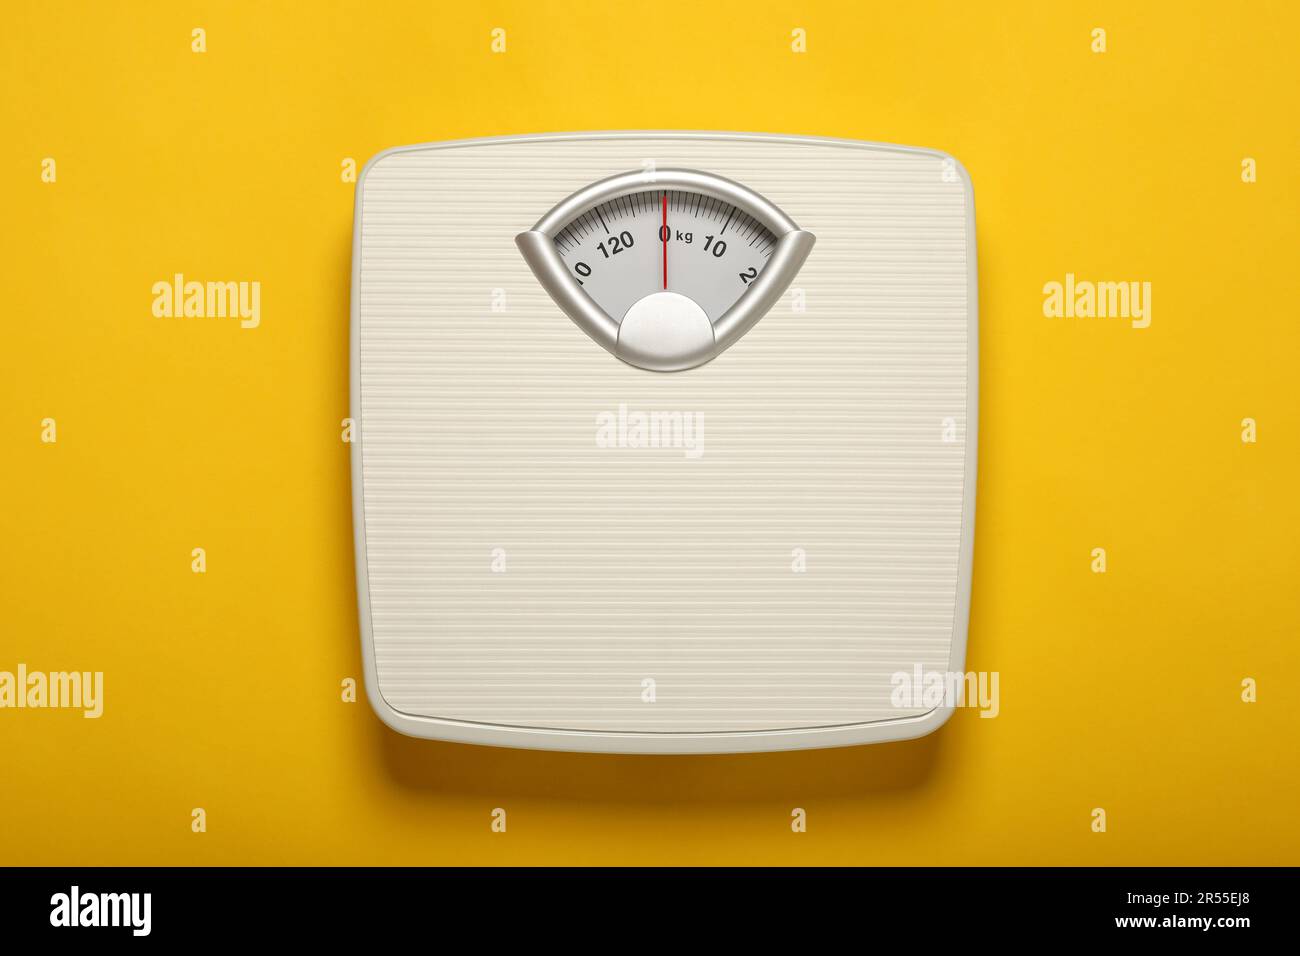 https://c8.alamy.com/comp/2R55EJ8/weigh-scales-on-yellow-background-top-view-overweight-concept-2R55EJ8.jpg